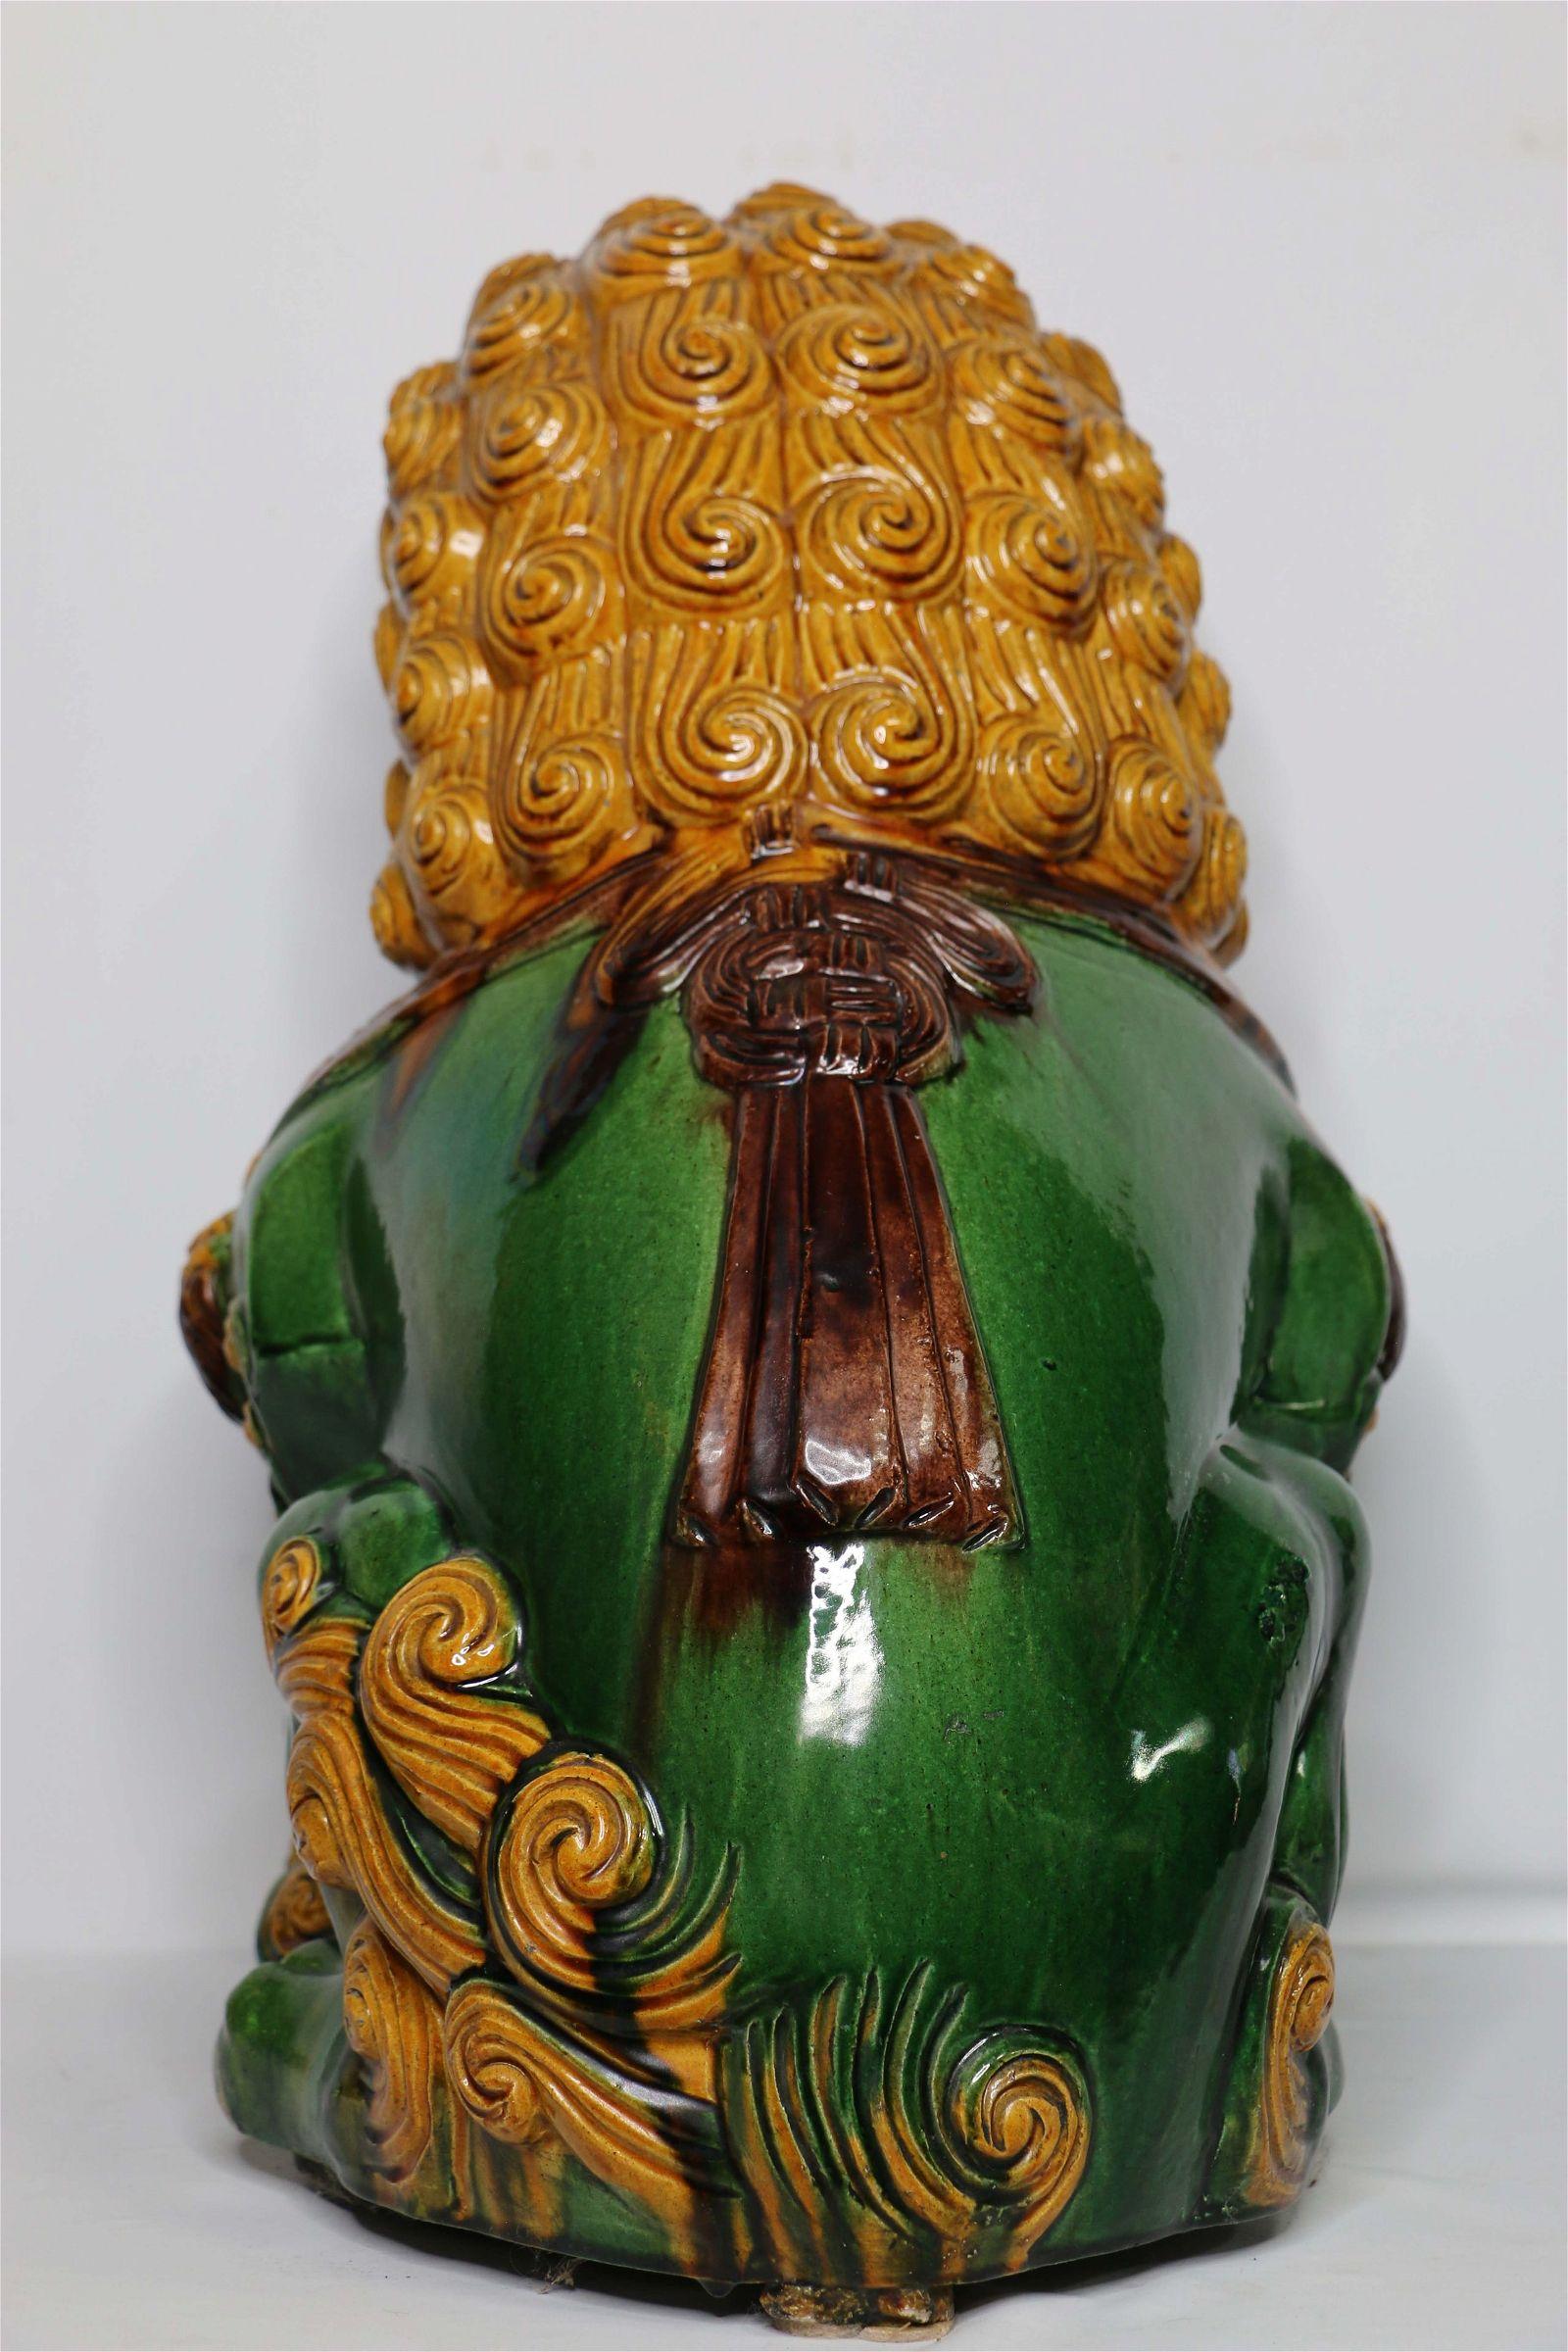 Hand-Crafted Antique Large Chinese Shanxi Glazed Ceramic Foo Dog For Sale